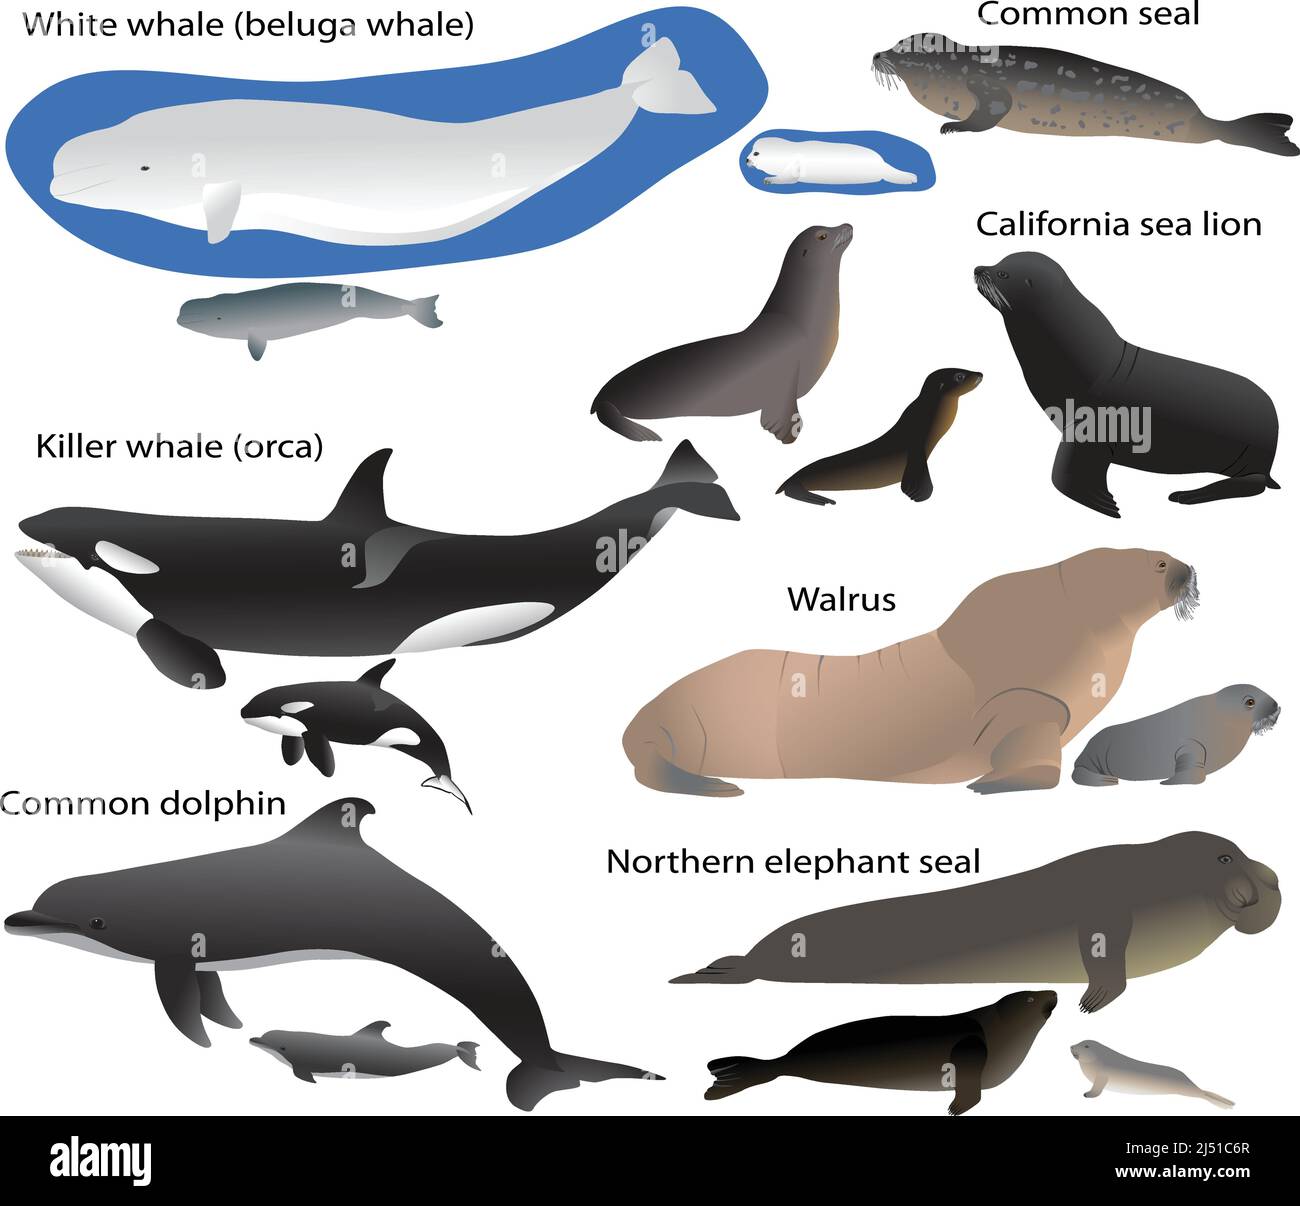 Collection of marine mammals and its cubs in colour image: sea lion, common seal, walrus, northern elephant seal, white whale, killer whale, dolphin Stock Vector